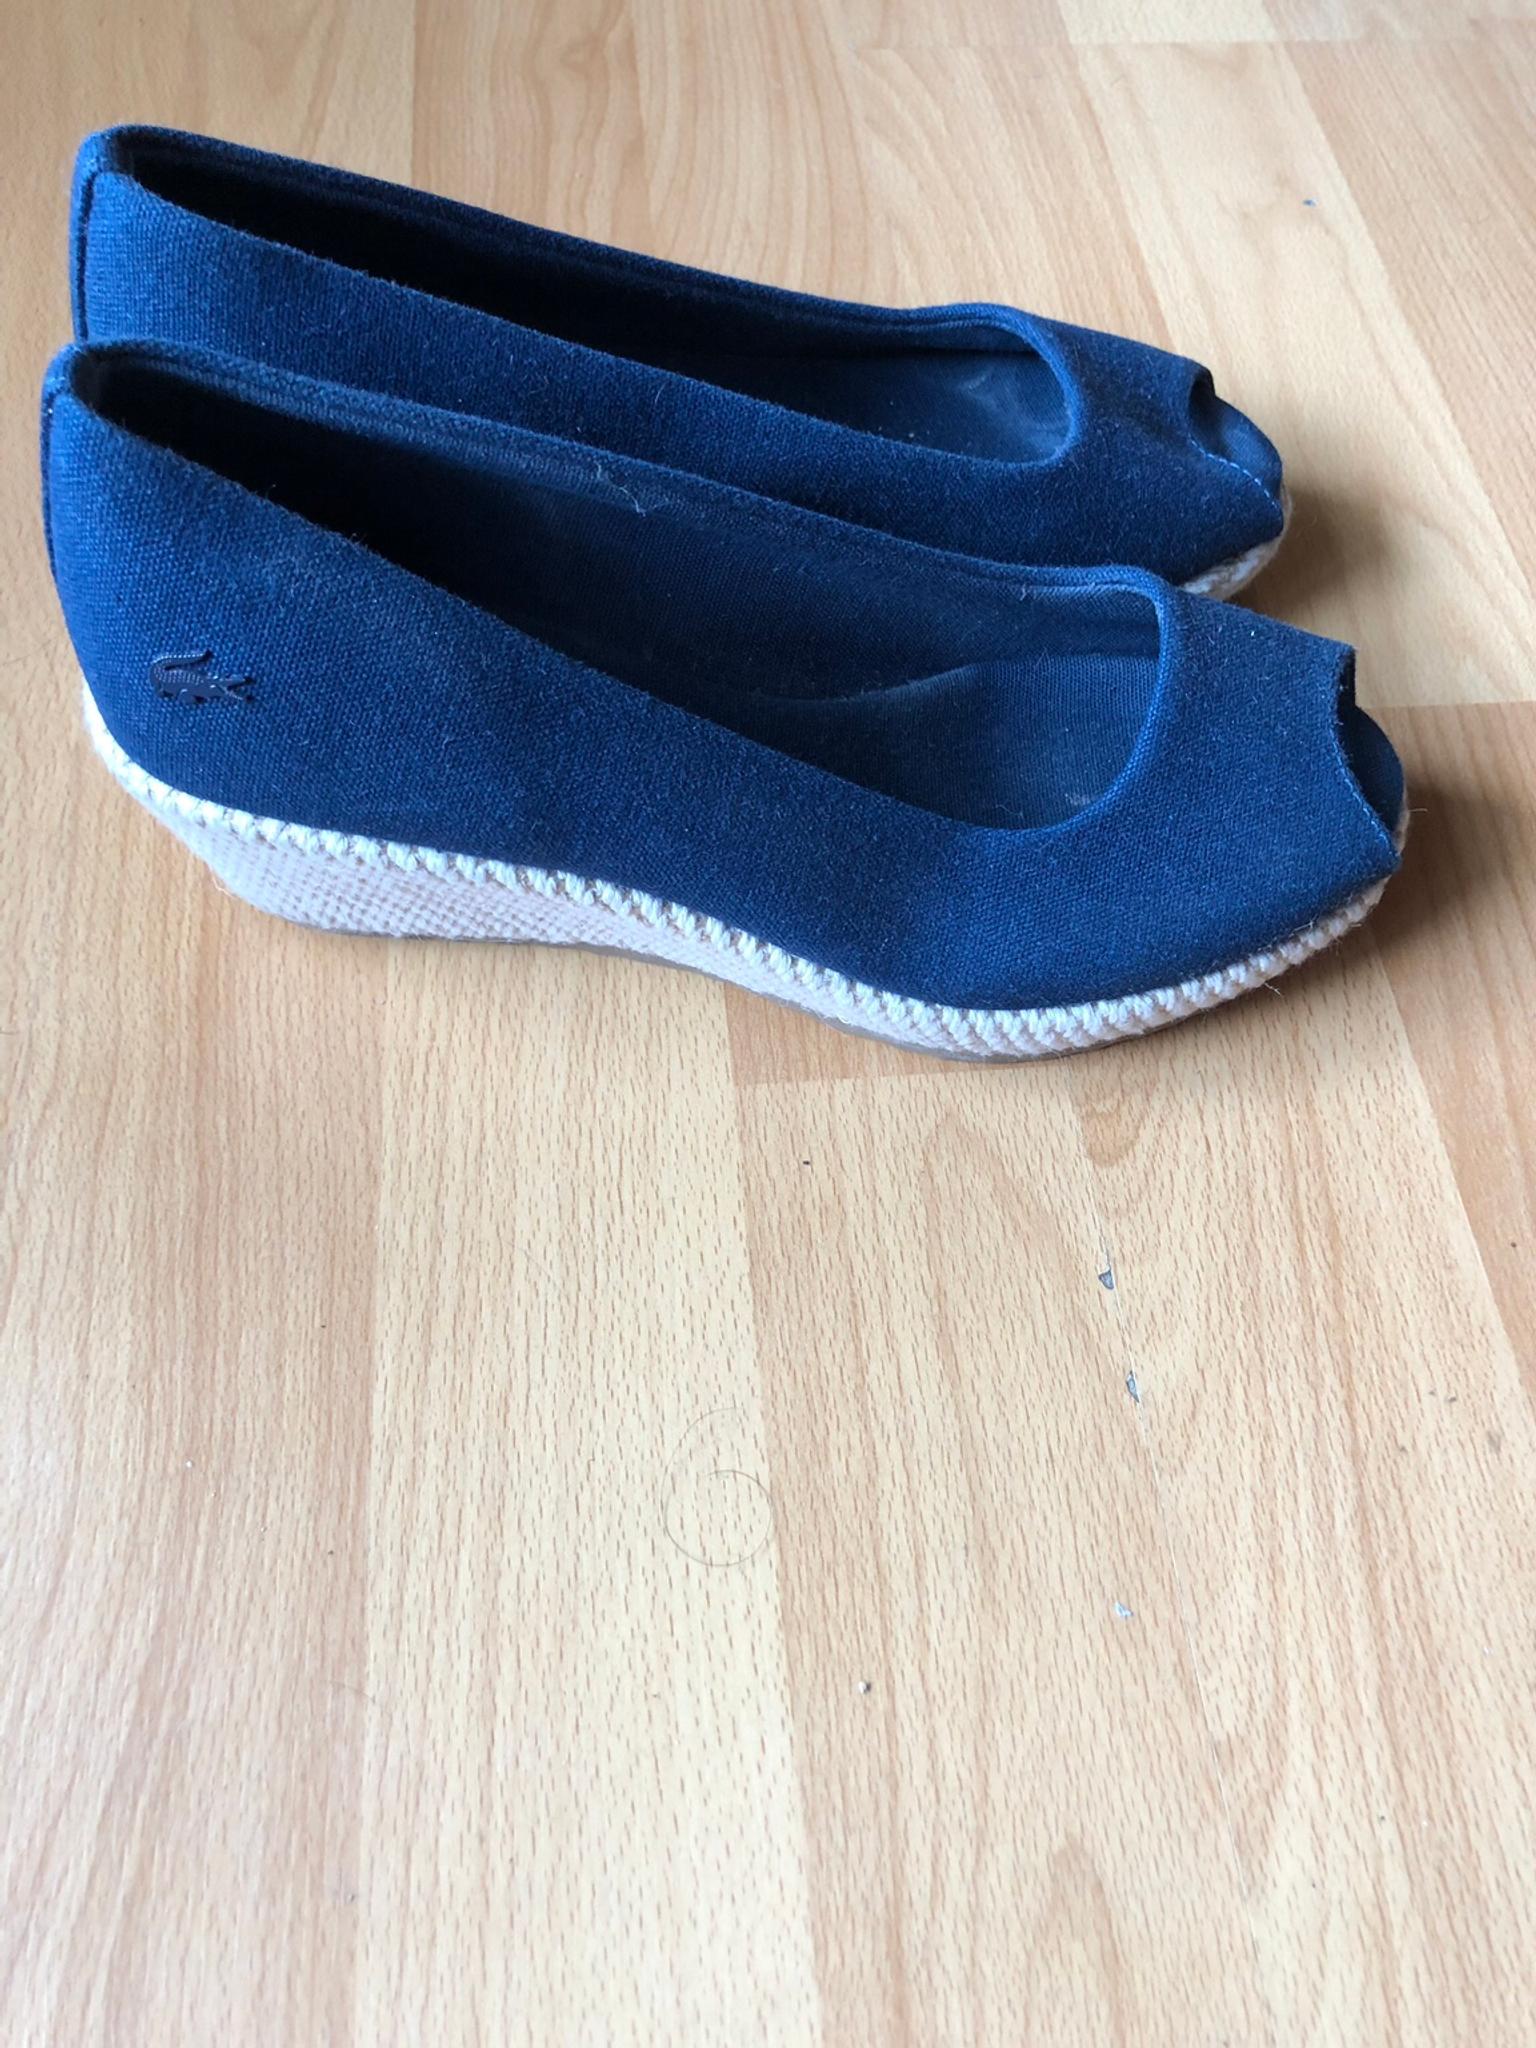 lacoste wedge shoes Cheaper Than Retail 